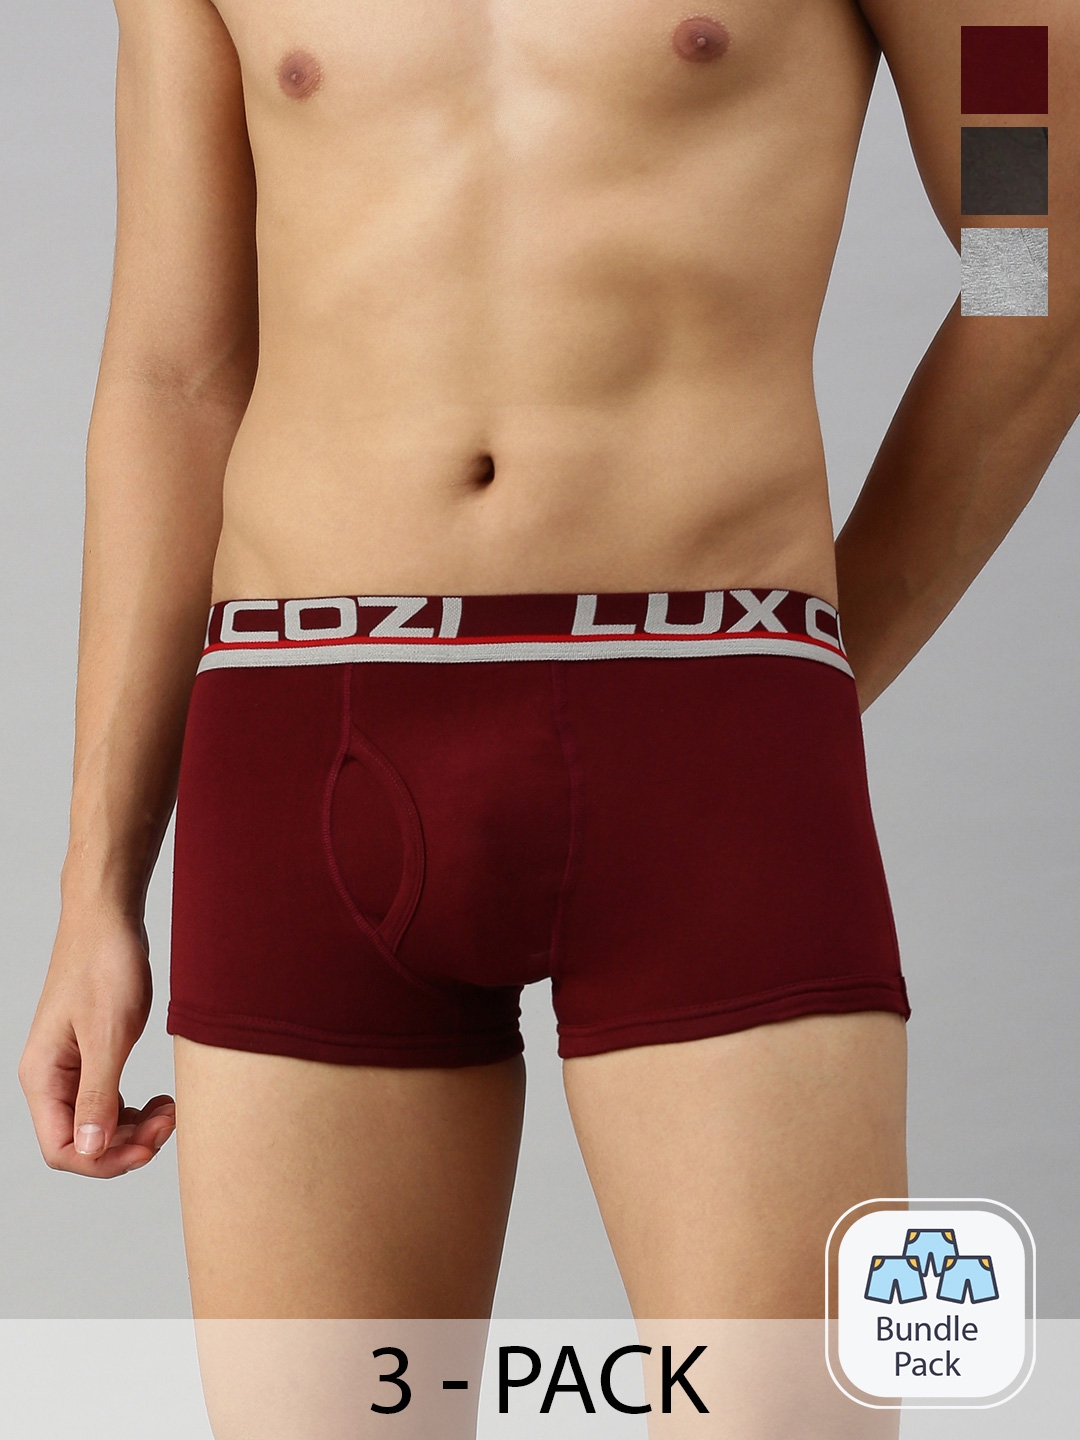 Buy Lux Cozi Mens Cotton Boxers Pack of 5 BIGSHOTLONG5Assorted75  CM at Amazonin